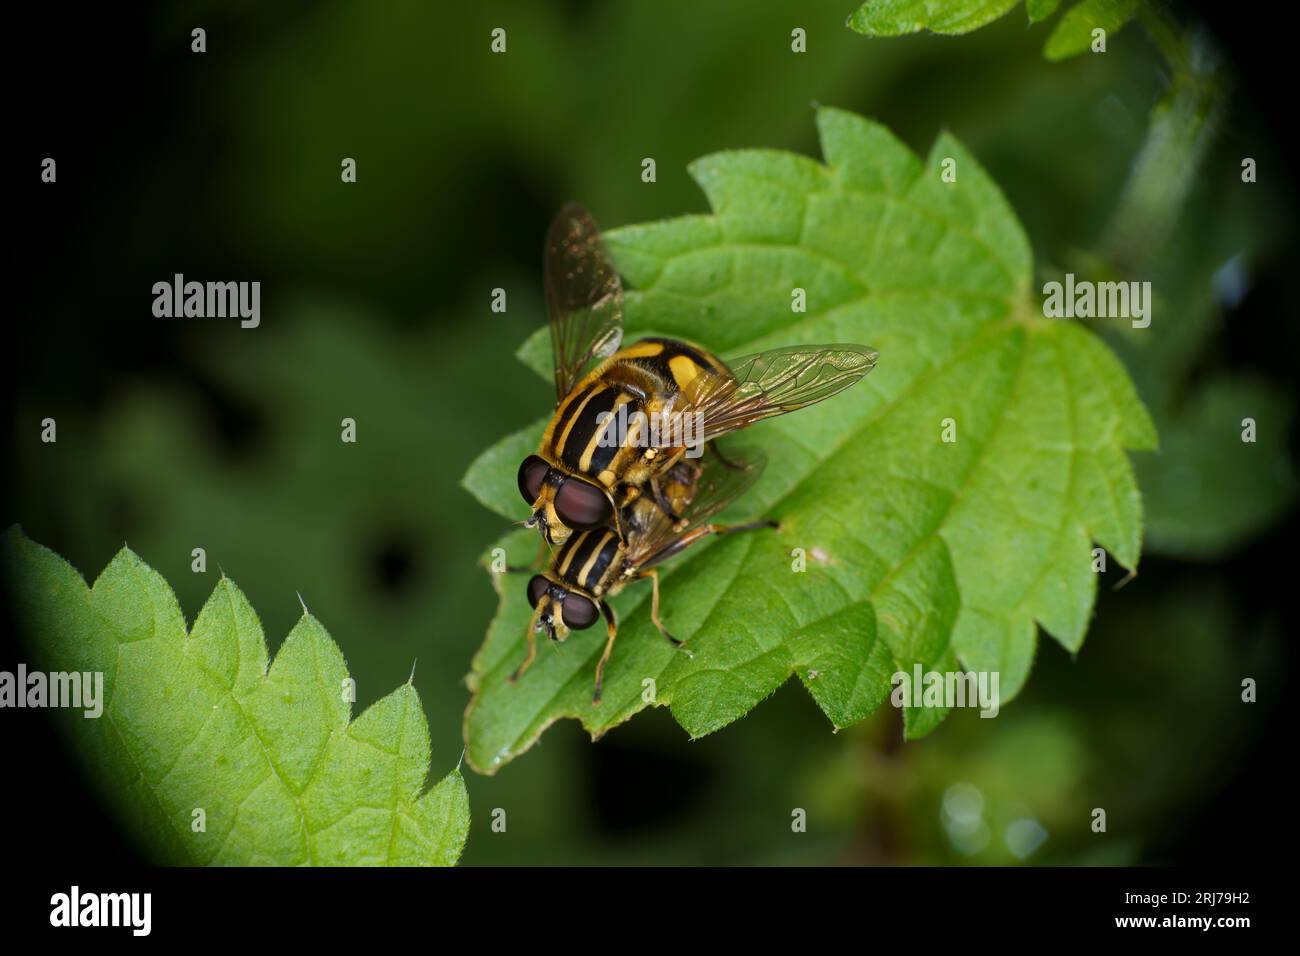 Mating Helophilus hybridus Family Syrphidae Genus Helophilus Wooly tailed marsh flies wild nature insects wallpapee Stock Photo